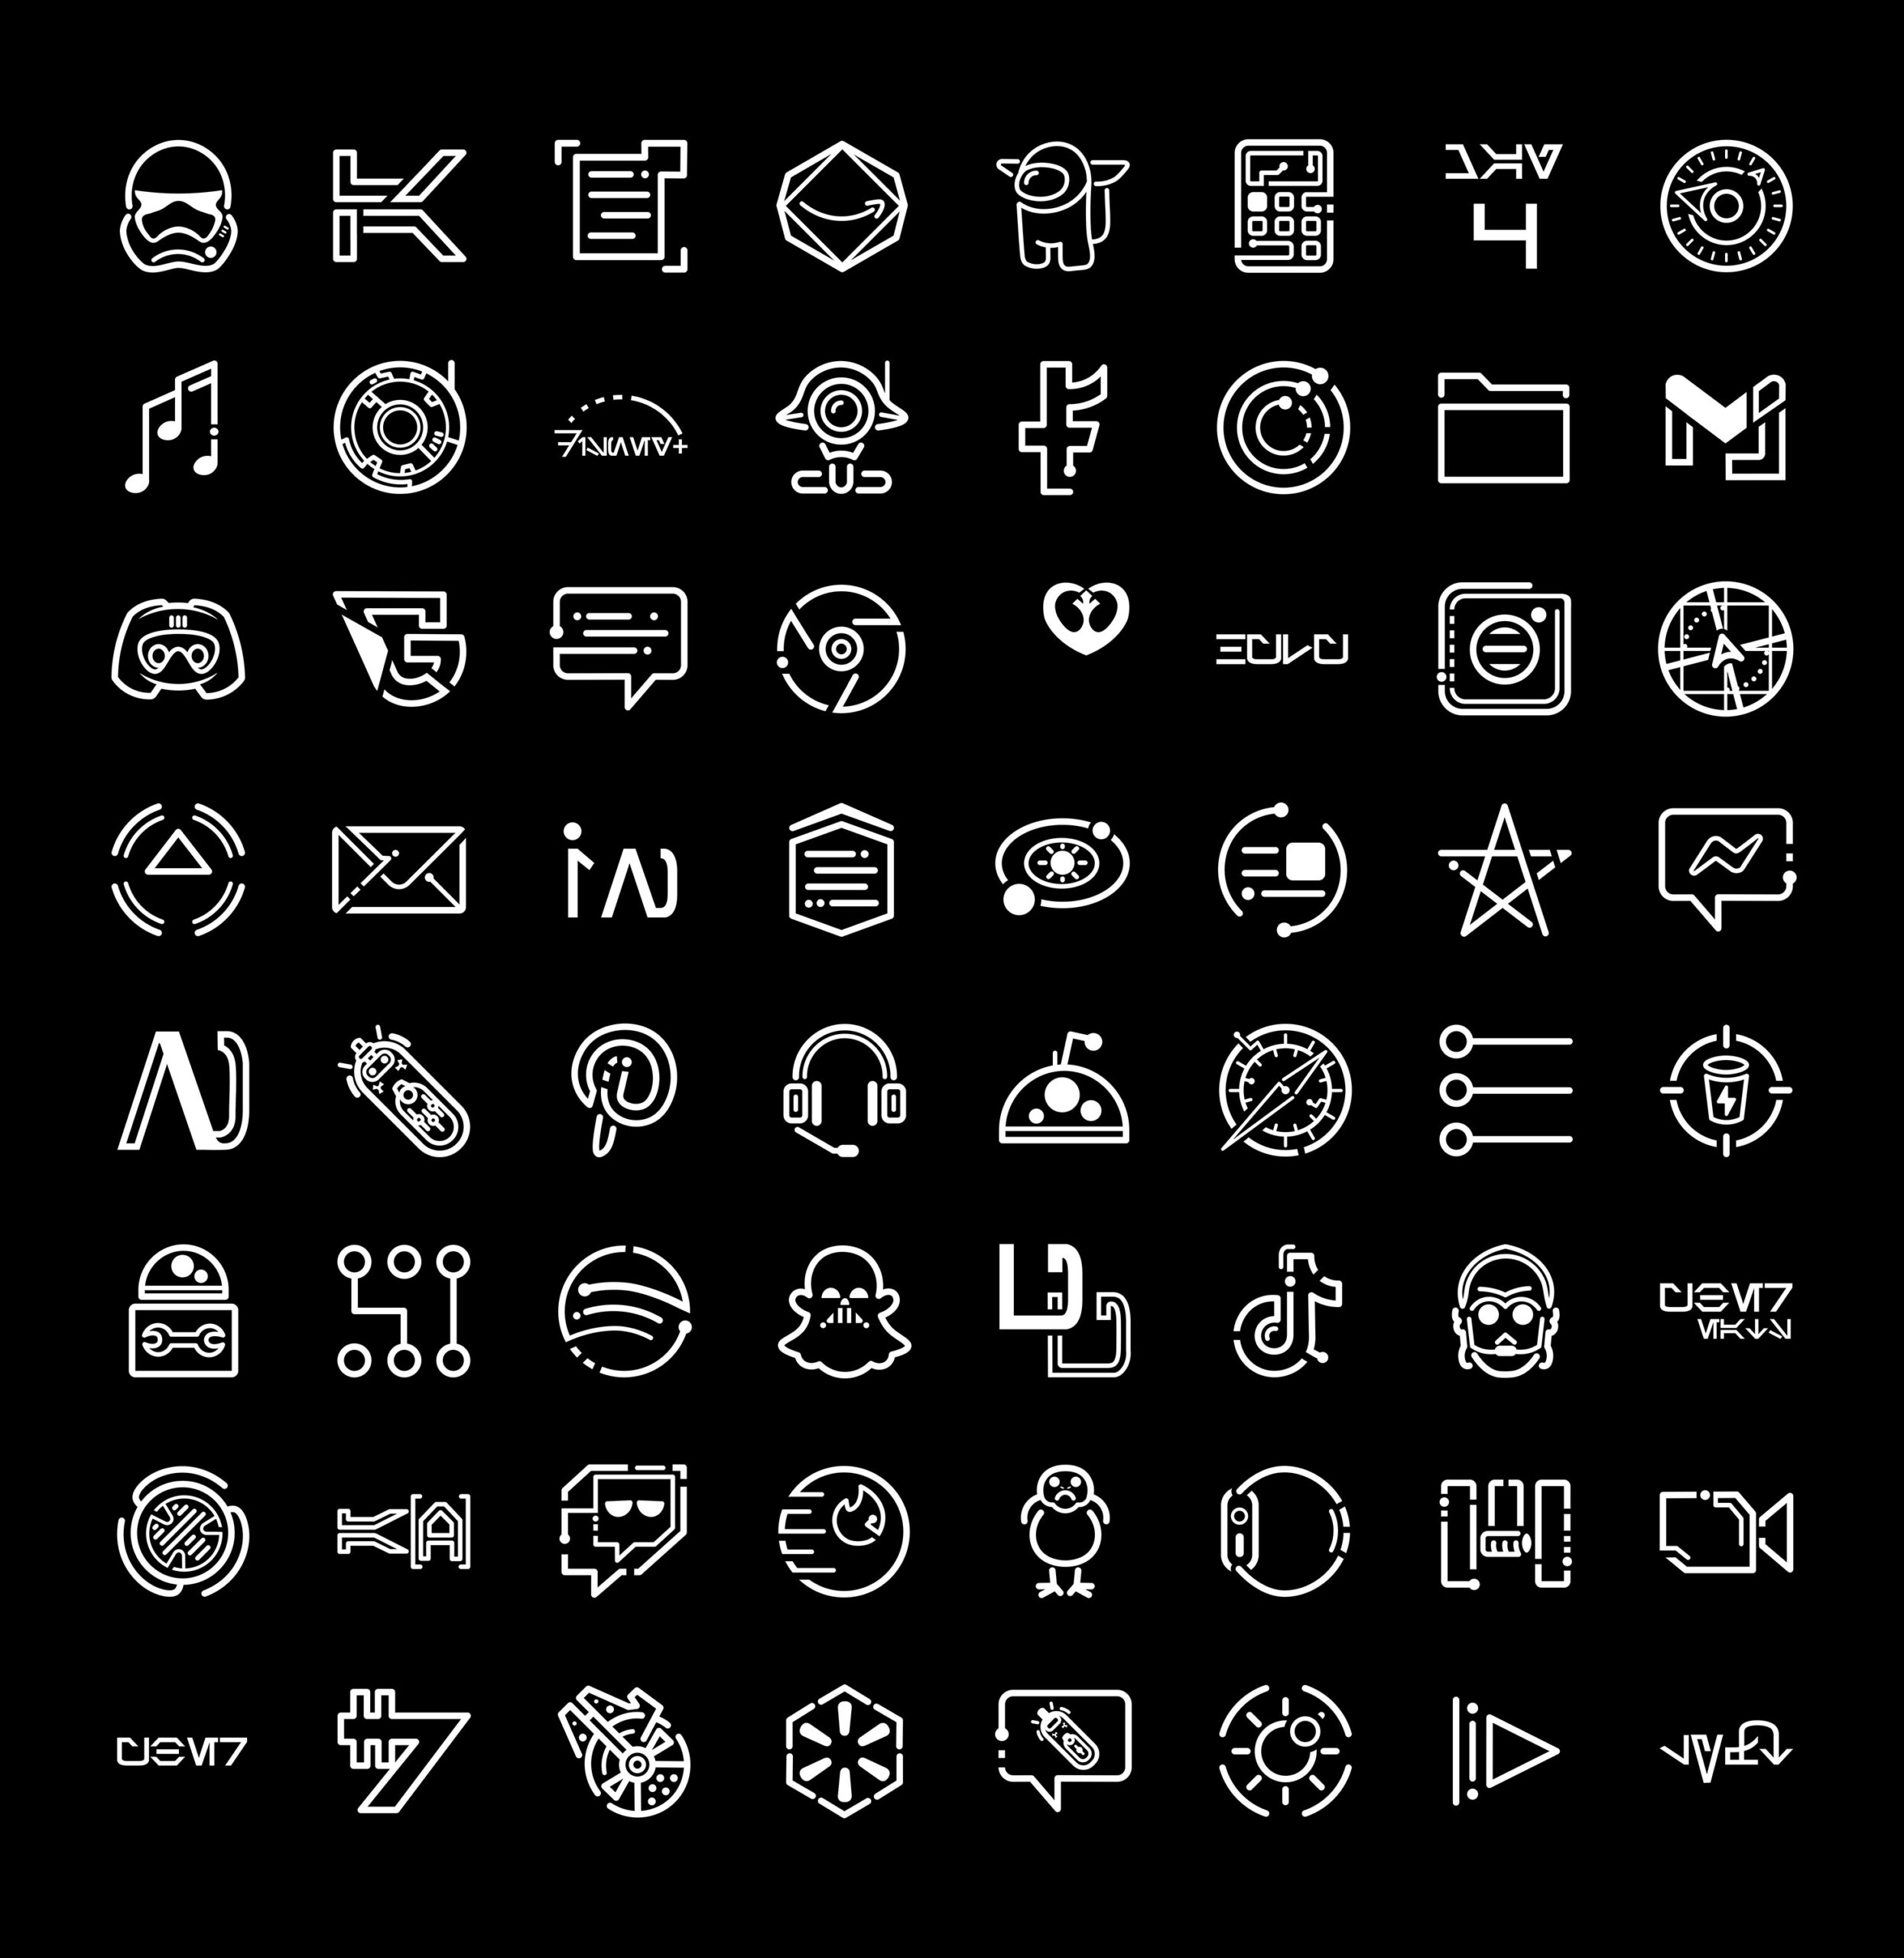 star wars datapad app icons pack preview 2